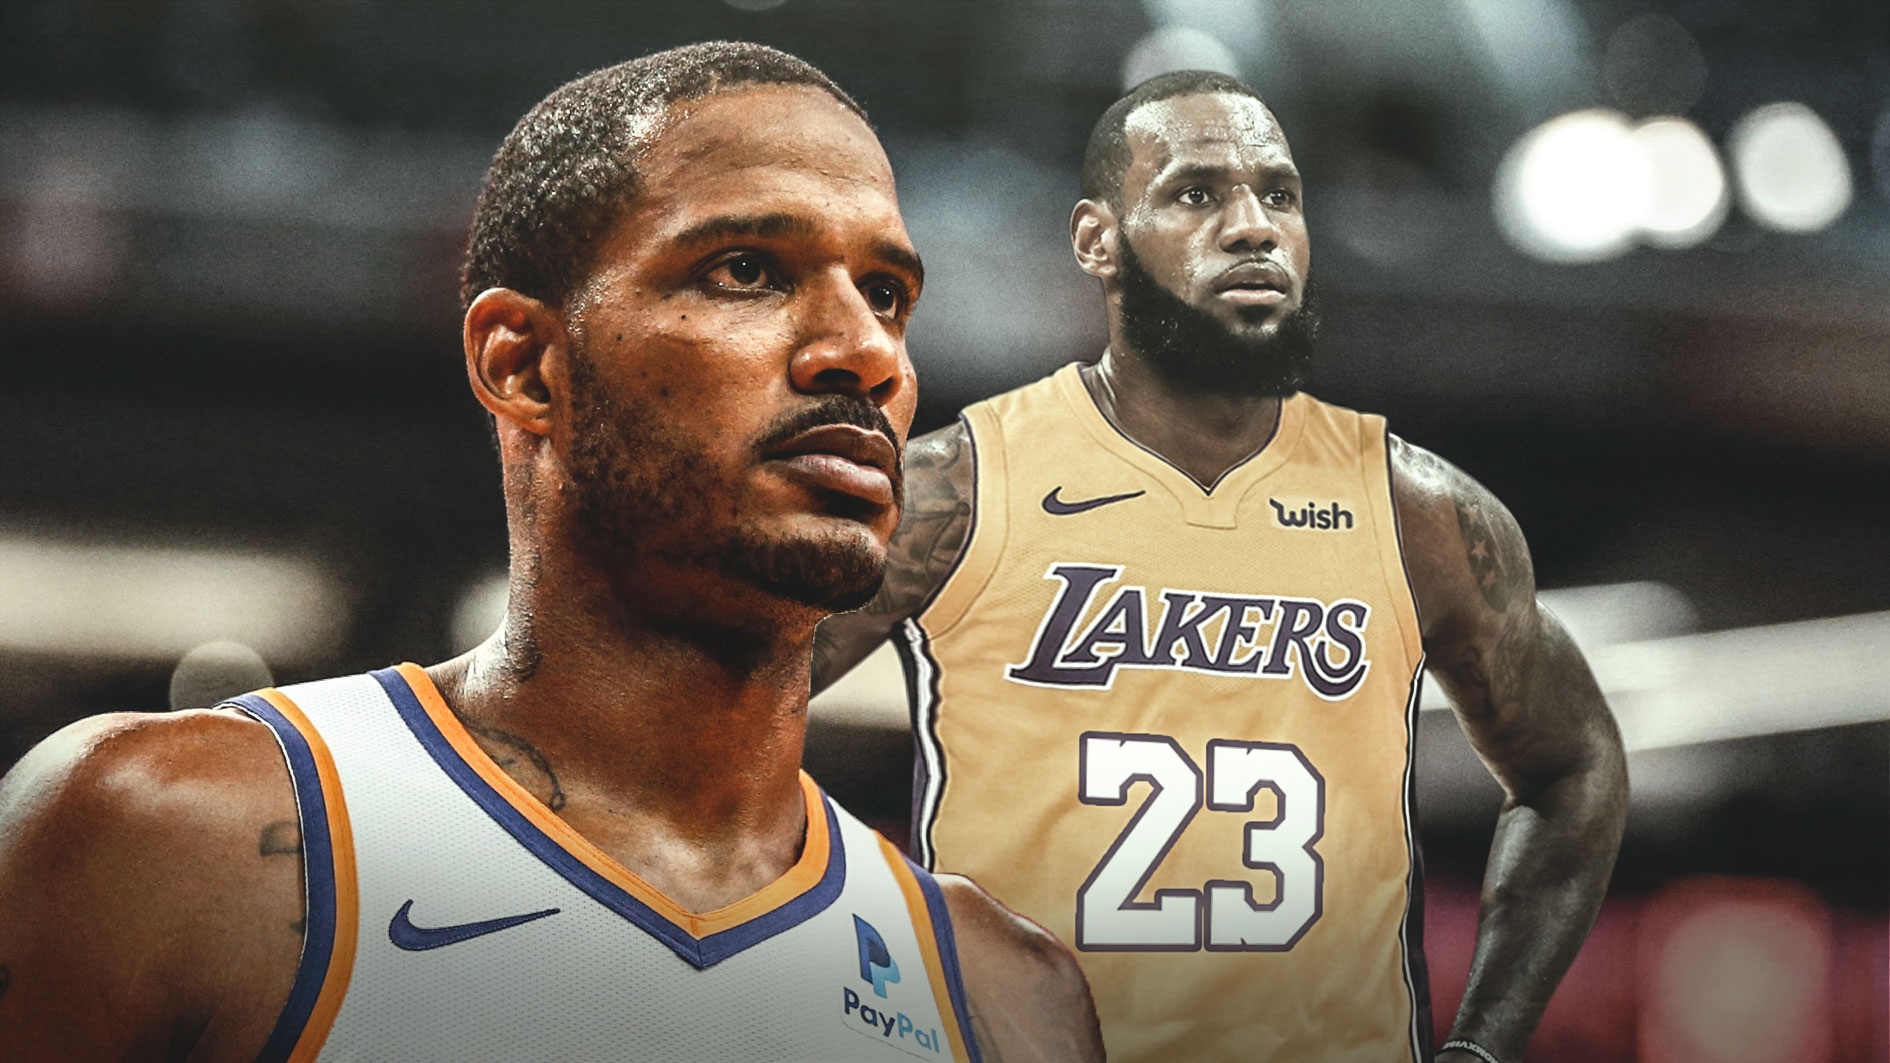 Trevor-Ariza-pinpoints-why-superstar-players-no-longer-want-to-join-LeBron-James